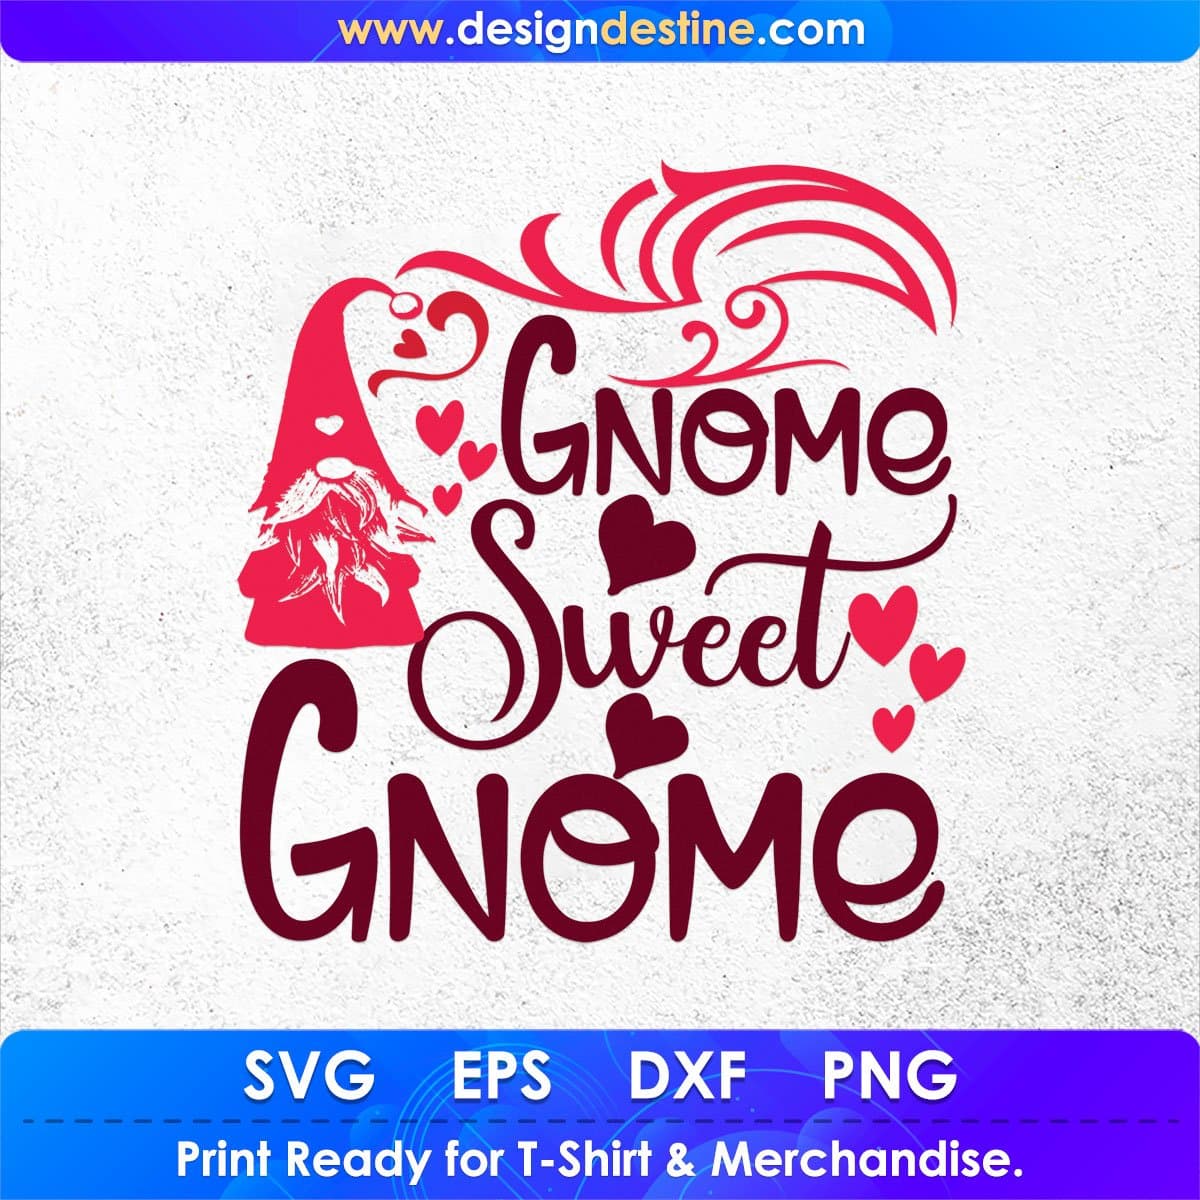 Gnome Sweet Gnome Video Game T shirt Design In Svg Png Cutting Printable Files